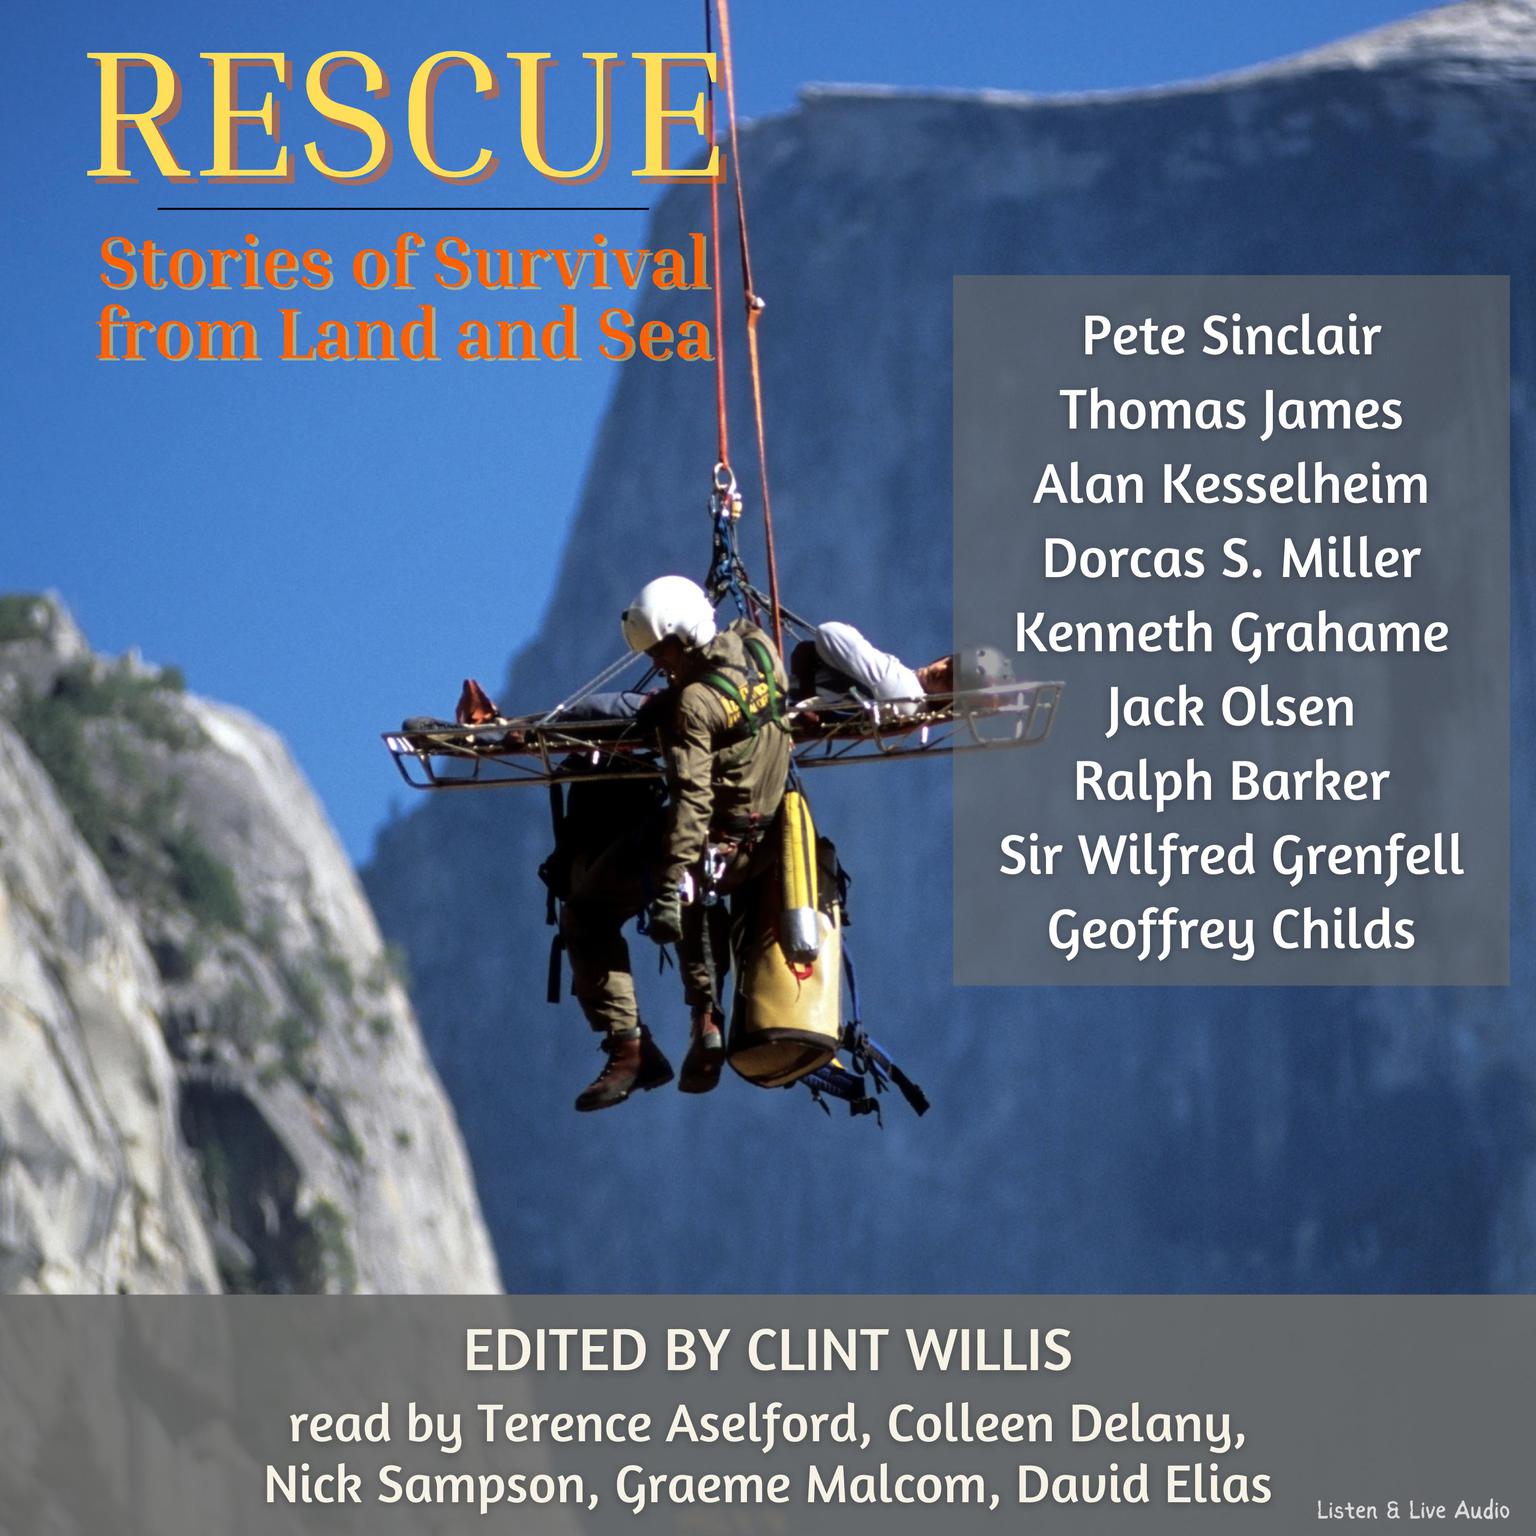 Rescue: Stories of Survival From Land and Sea: Stories of Survival From Land and Sea Audiobook, by Kenneth Grahame